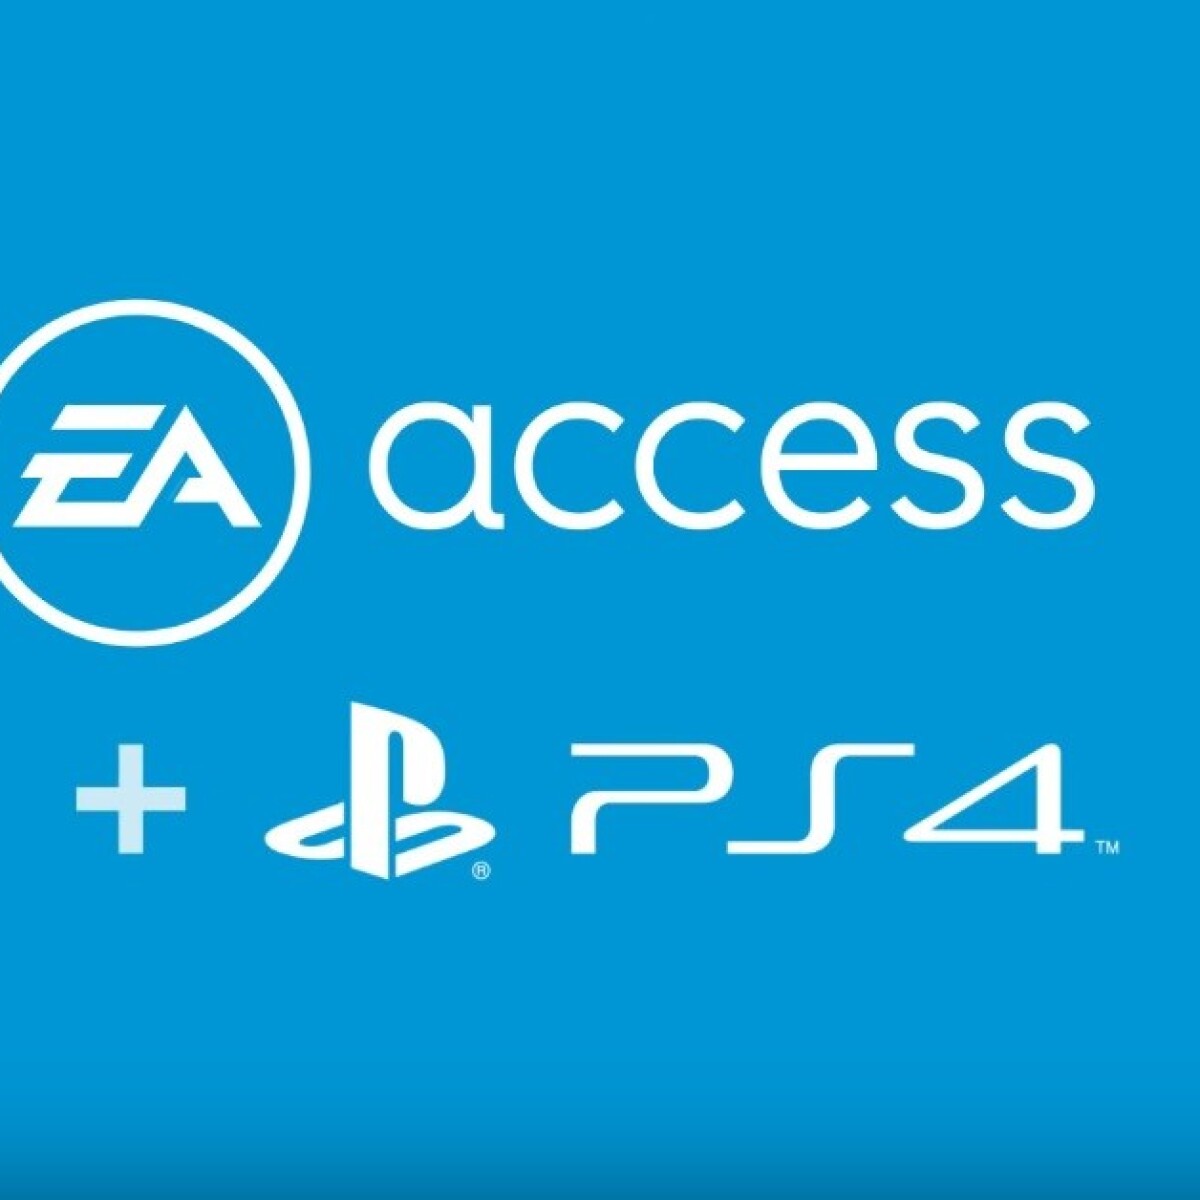 PLAYSTATION accessibility. Ea access